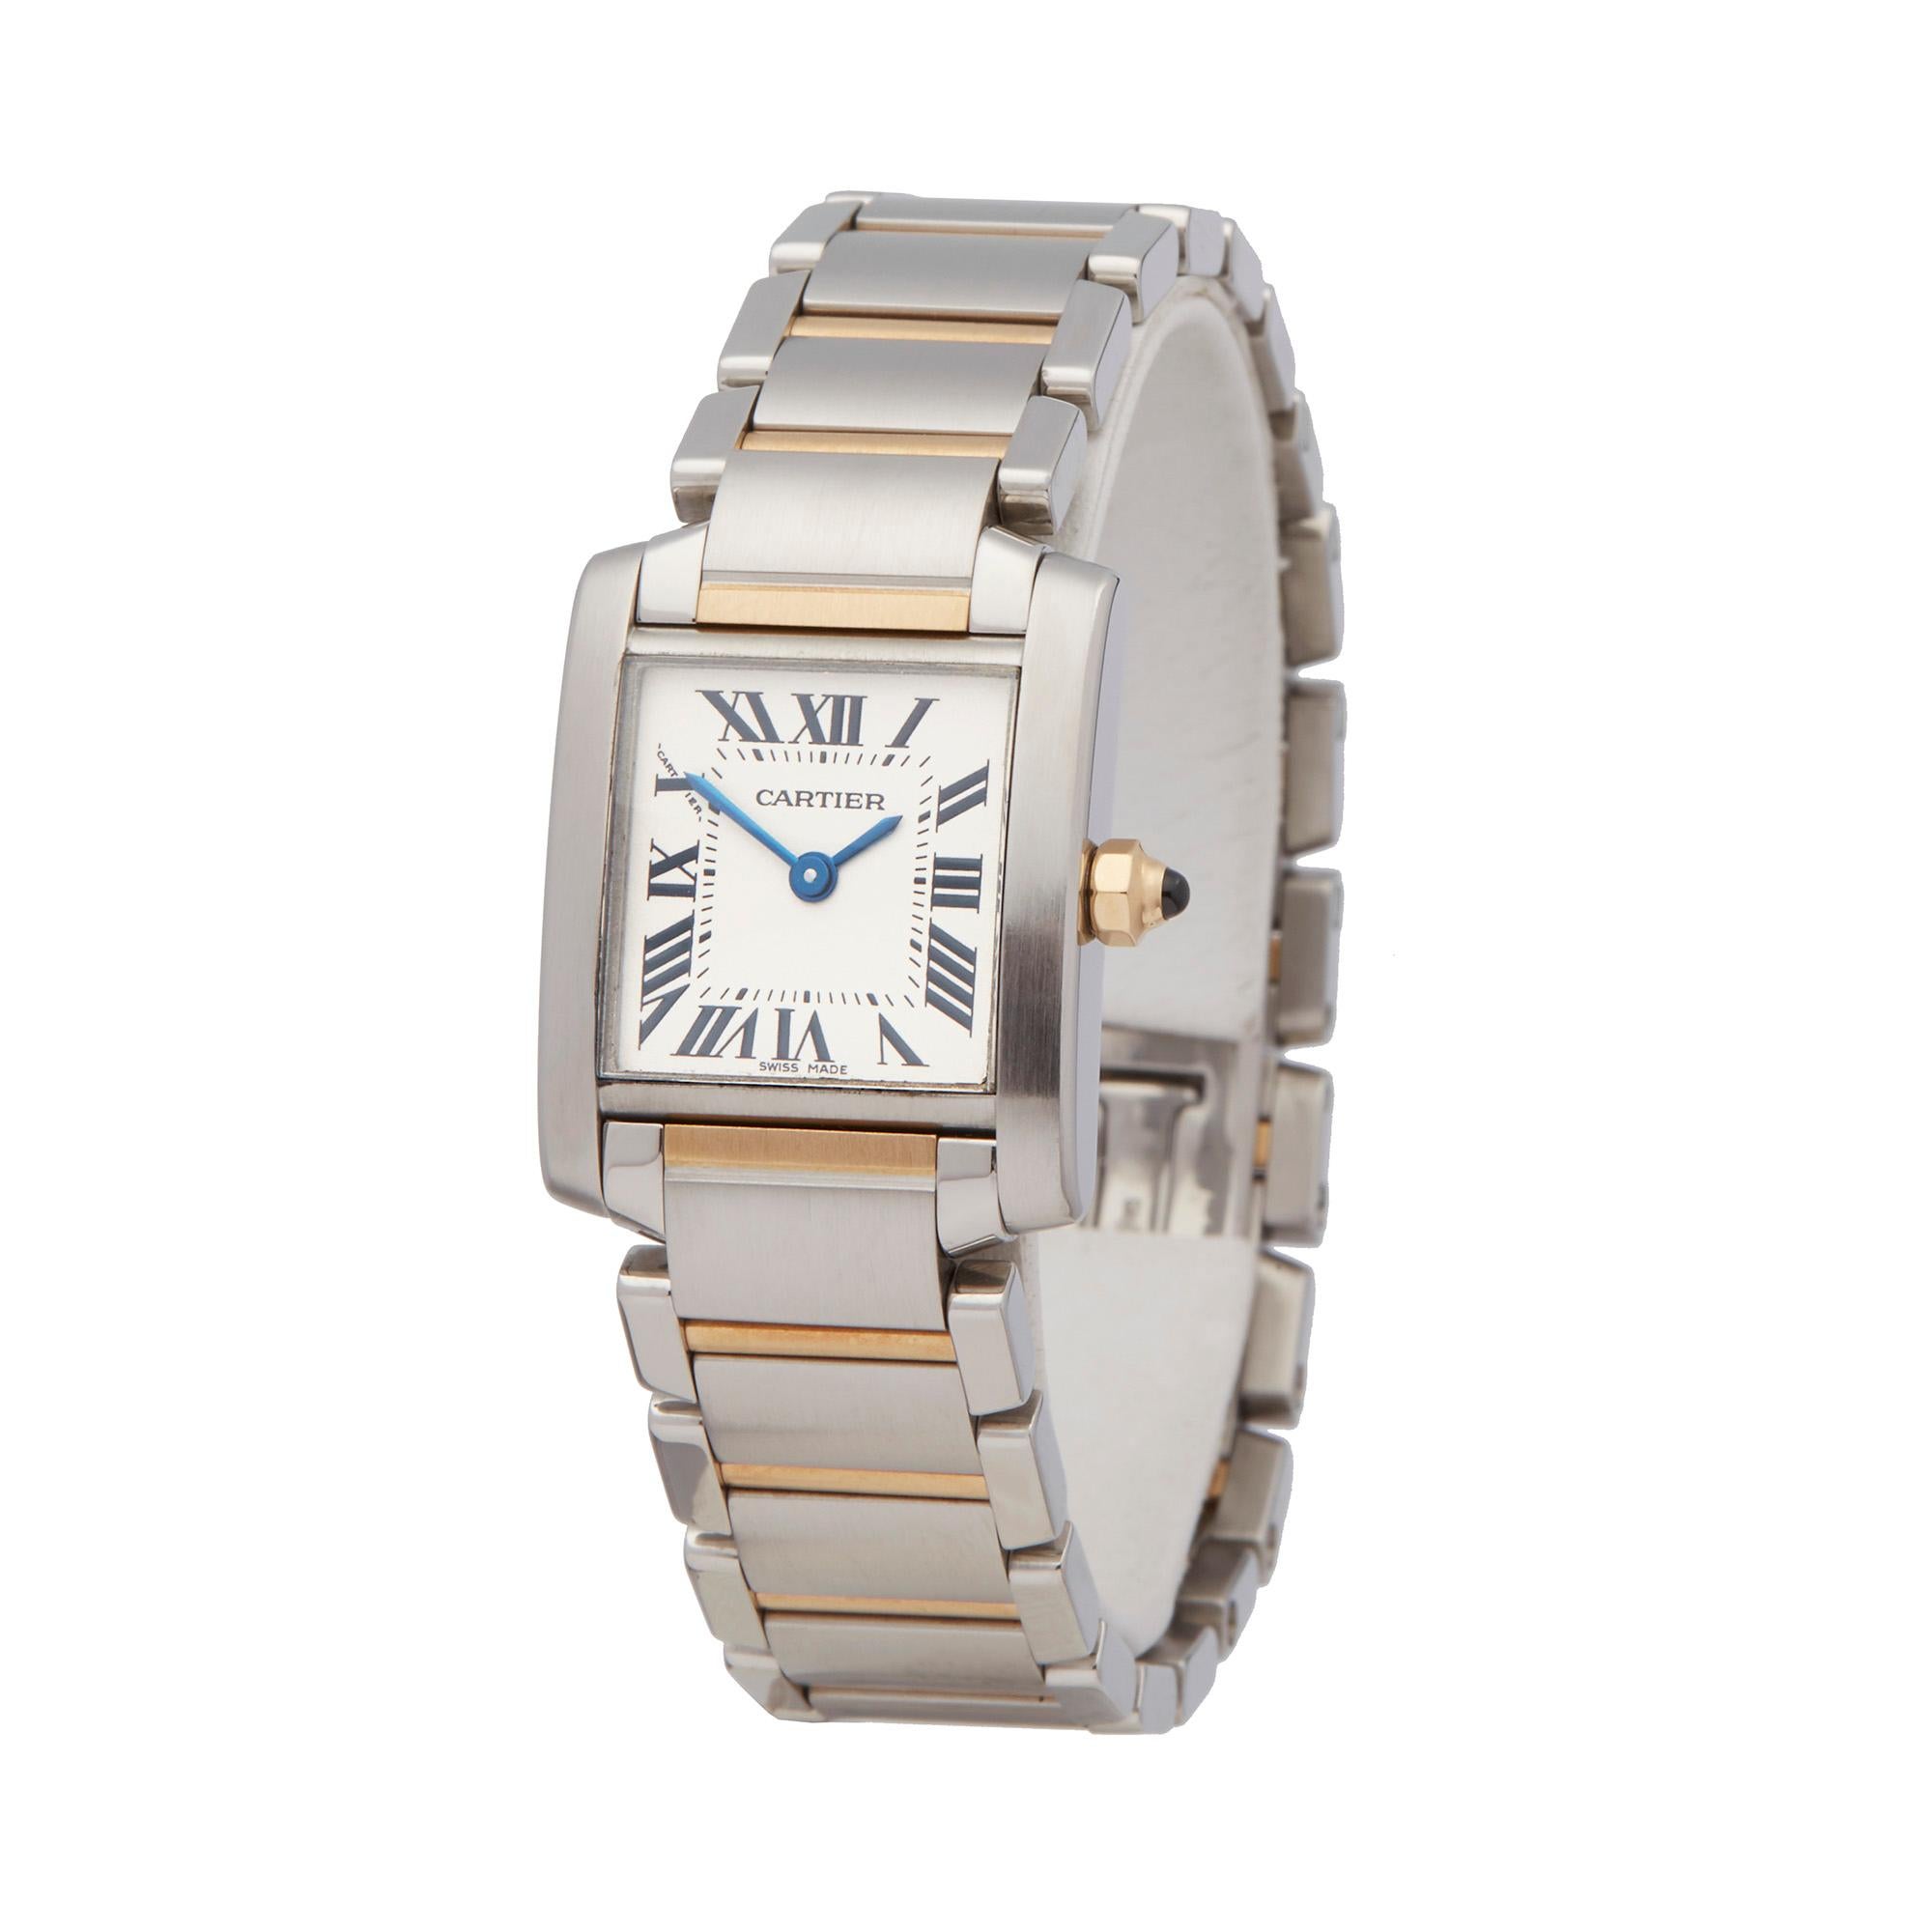 Reference: W5720
Manufacturer: Cartier
Model: Tank Francaise
Model Reference: 2384
Age: Circa 2000's
Gender: Women's
Box and Papers: Presentation Box
Dial: White Roman
Glass: Sapphire Crystal
Movement: Quartz
Water Resistance: To Manufacturers